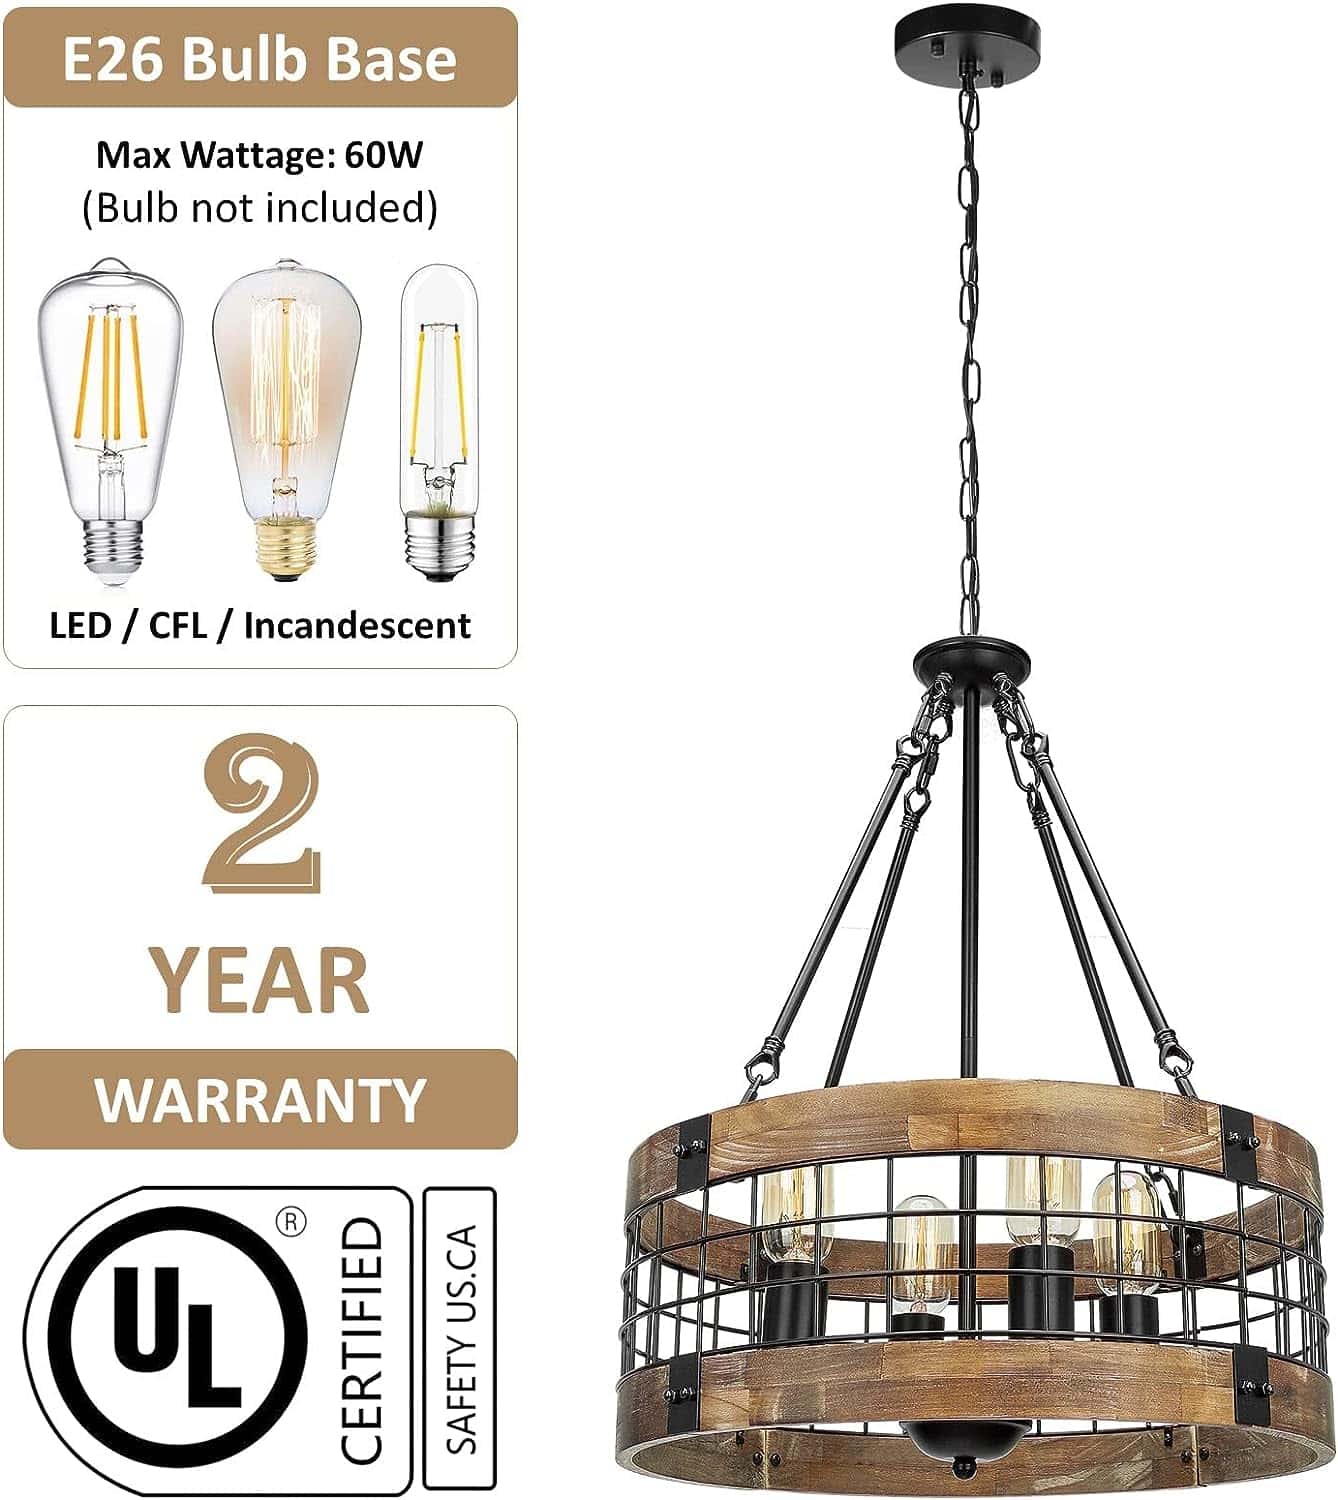 ACNKTZ Farmhouse Rustic Chandelier Light Fixture 4-Light Round Hanging Pendant Lighting for Dining Room Entryway Kitchen Island Foyer Breakfast Area Black Wood and Black Metal Finish 7